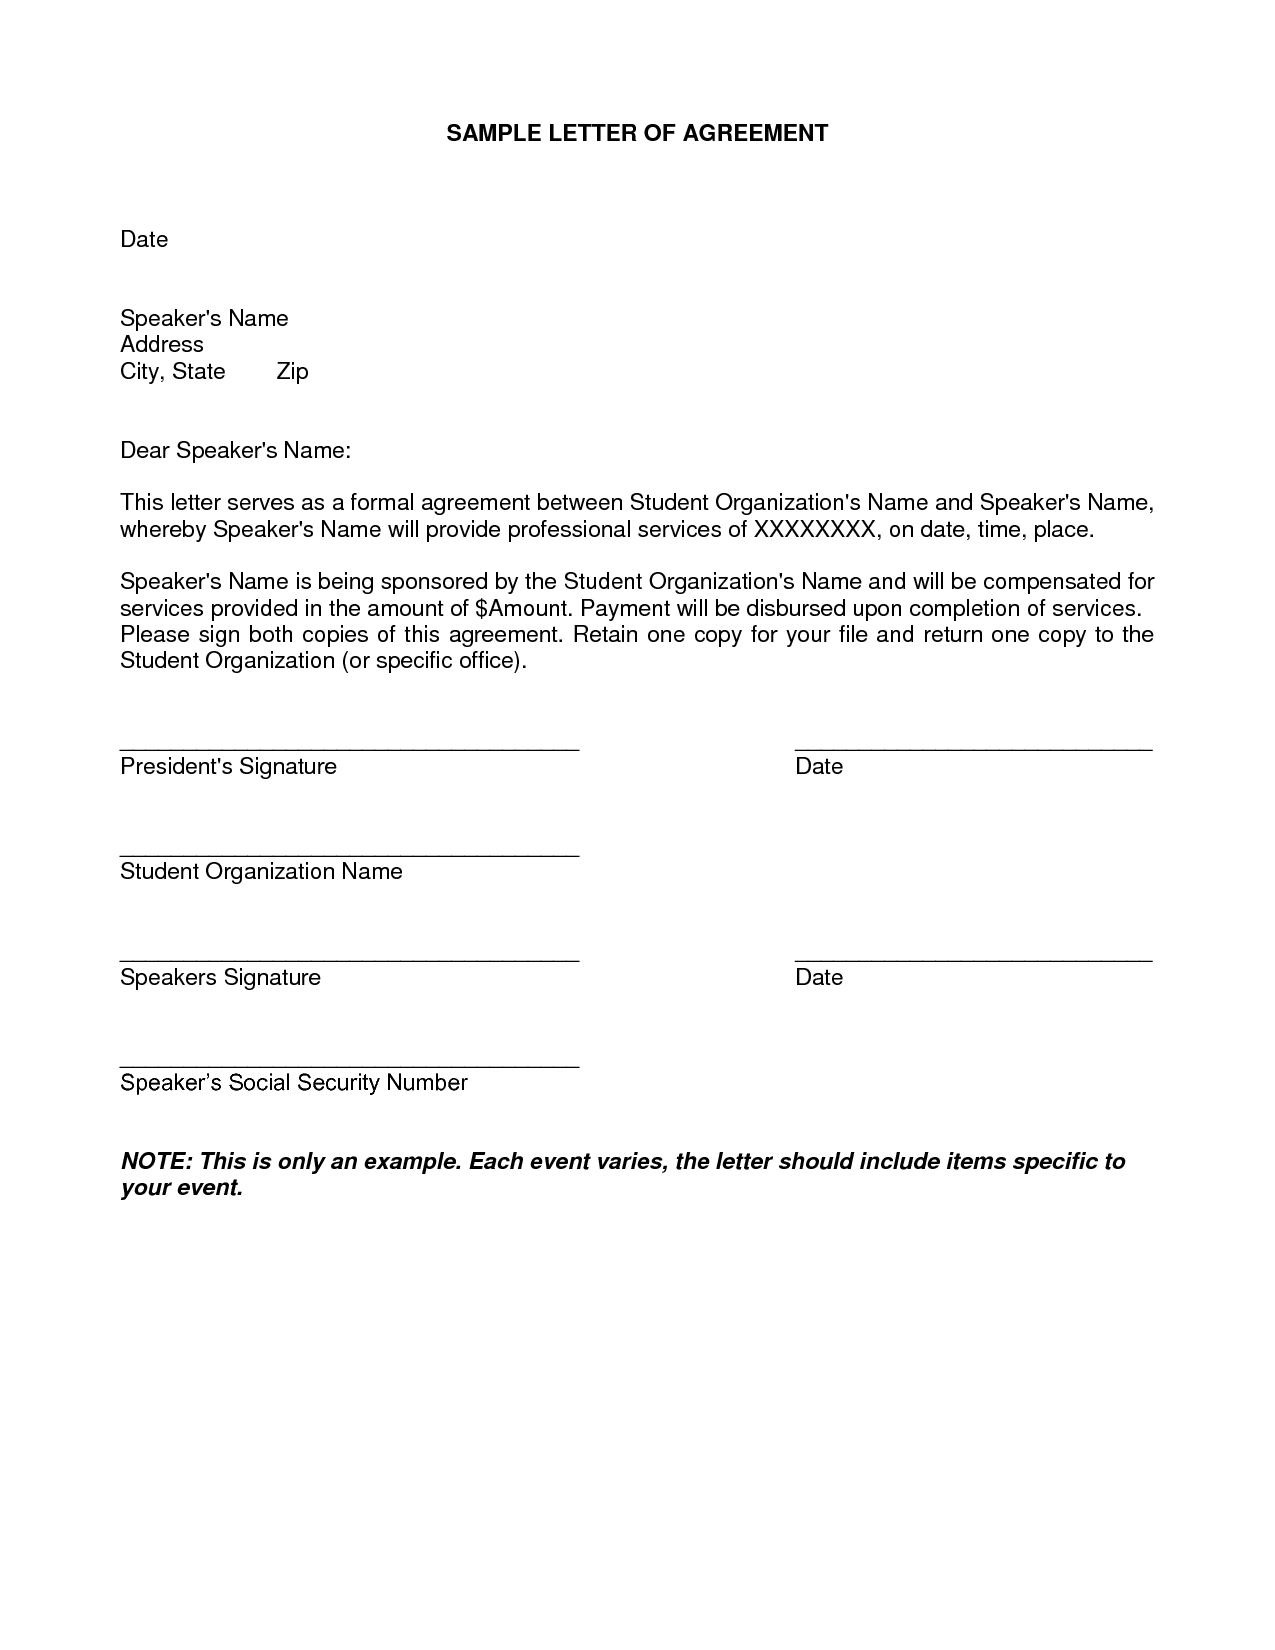 Repayment Agreement Letter Template - Letter Agreement Samples Template Seeabruzzo Letter Of